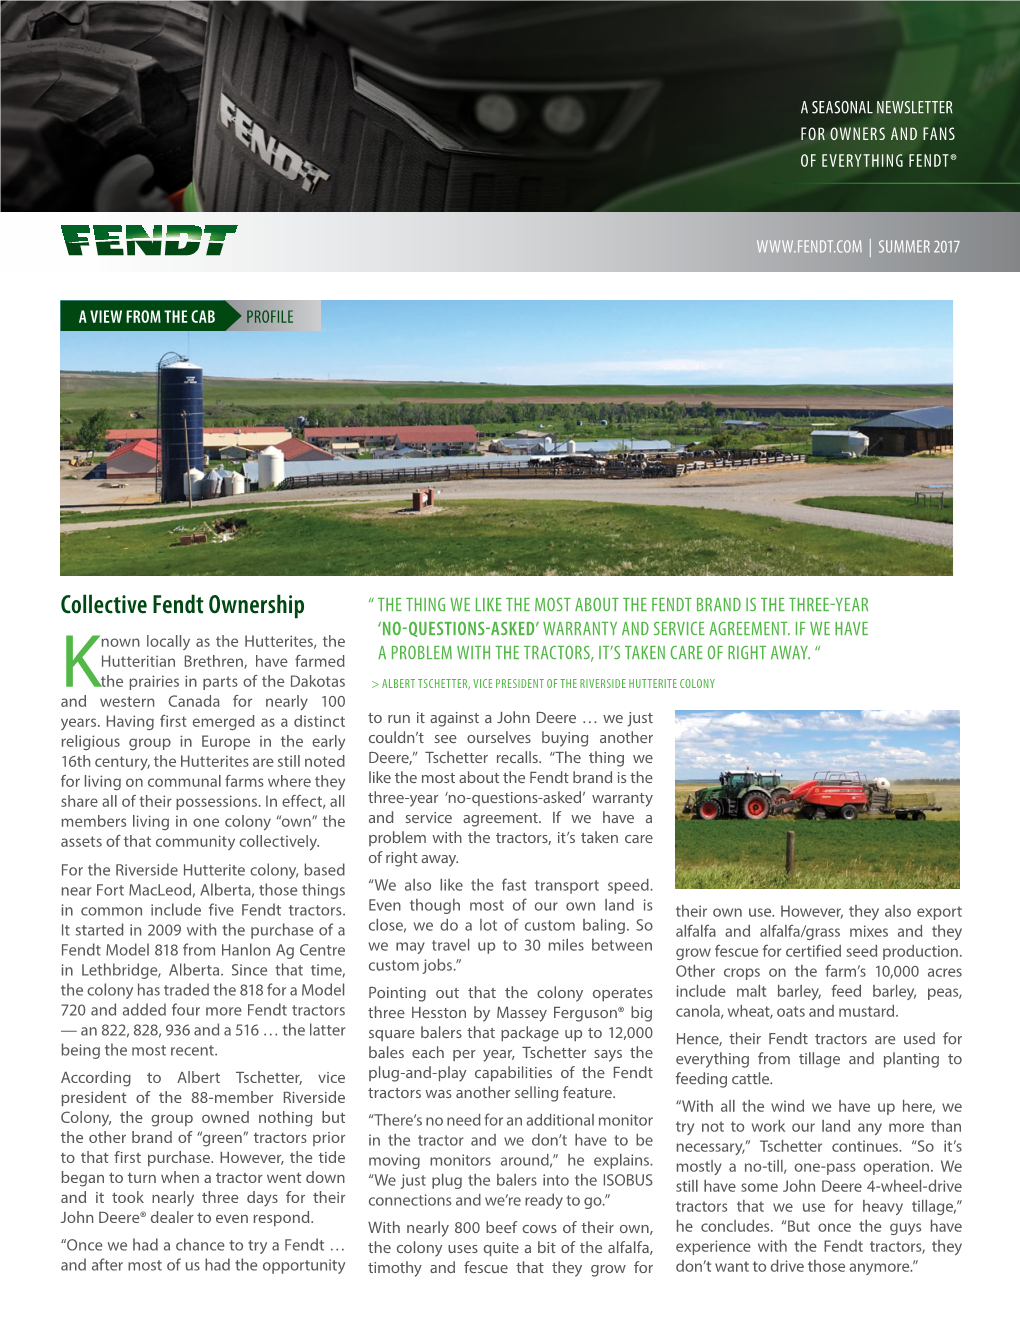 Collective Fendt Ownership “ the THING WE LIKE the MOST ABOUT the FENDT BRAND IS the THREE-YEAR ‘NO-QUESTIONS-ASKED’ WARRANTY and SERVICE AGREEMENT